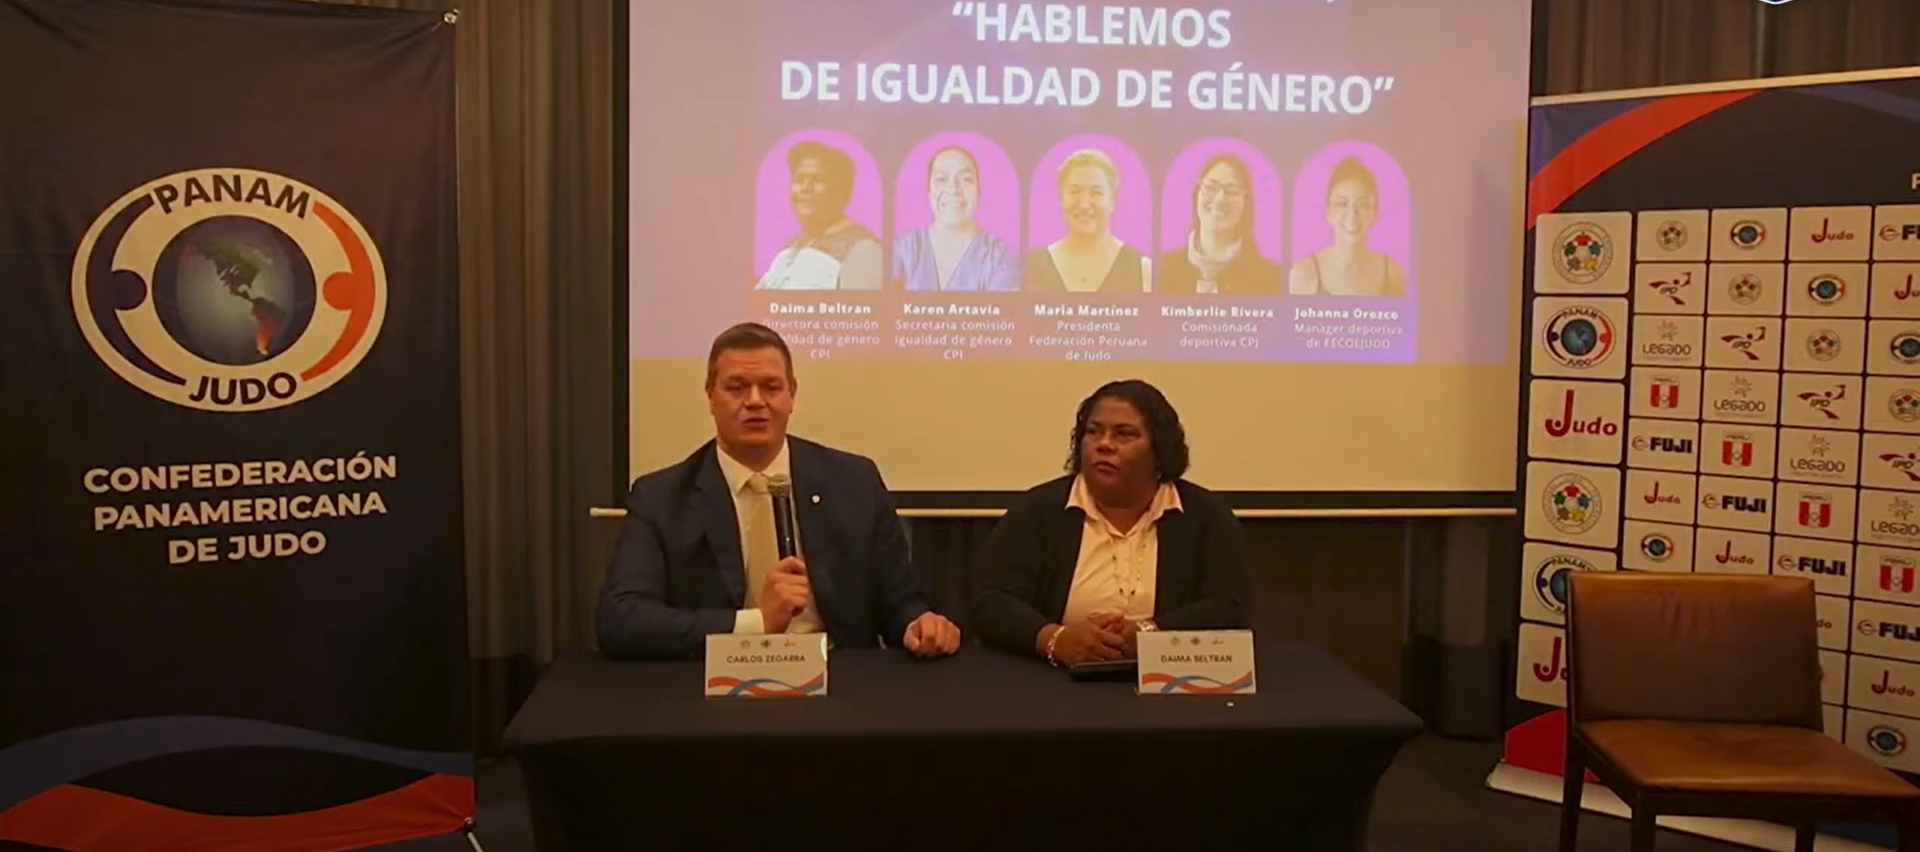 CPJ President Carlos Zegarra, left, opened the Let's Talk About Gender Equality seminar, held in Lima ©YouTube